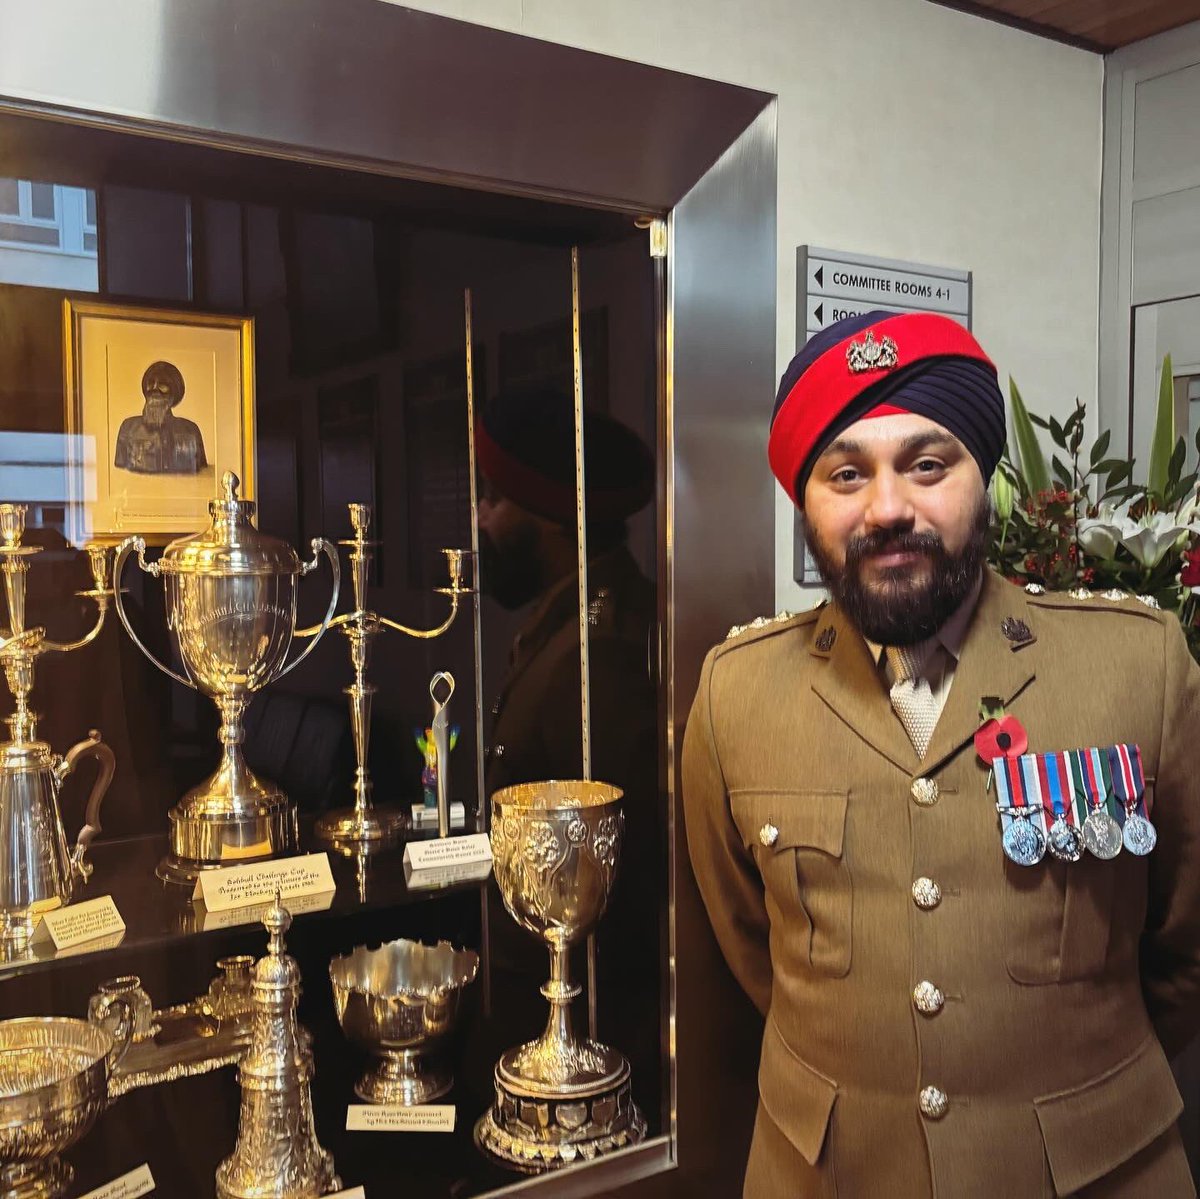 Proud to see @SolihullCouncil displaying the #WW1SikhMemorial painting by @shropshirearti1 in their prestigious silverware display at Solihull Civic Centre. Proud of Capt @JSinghSohal for helping educate council and leaders about Sikh contribution #Wewillrememberthem